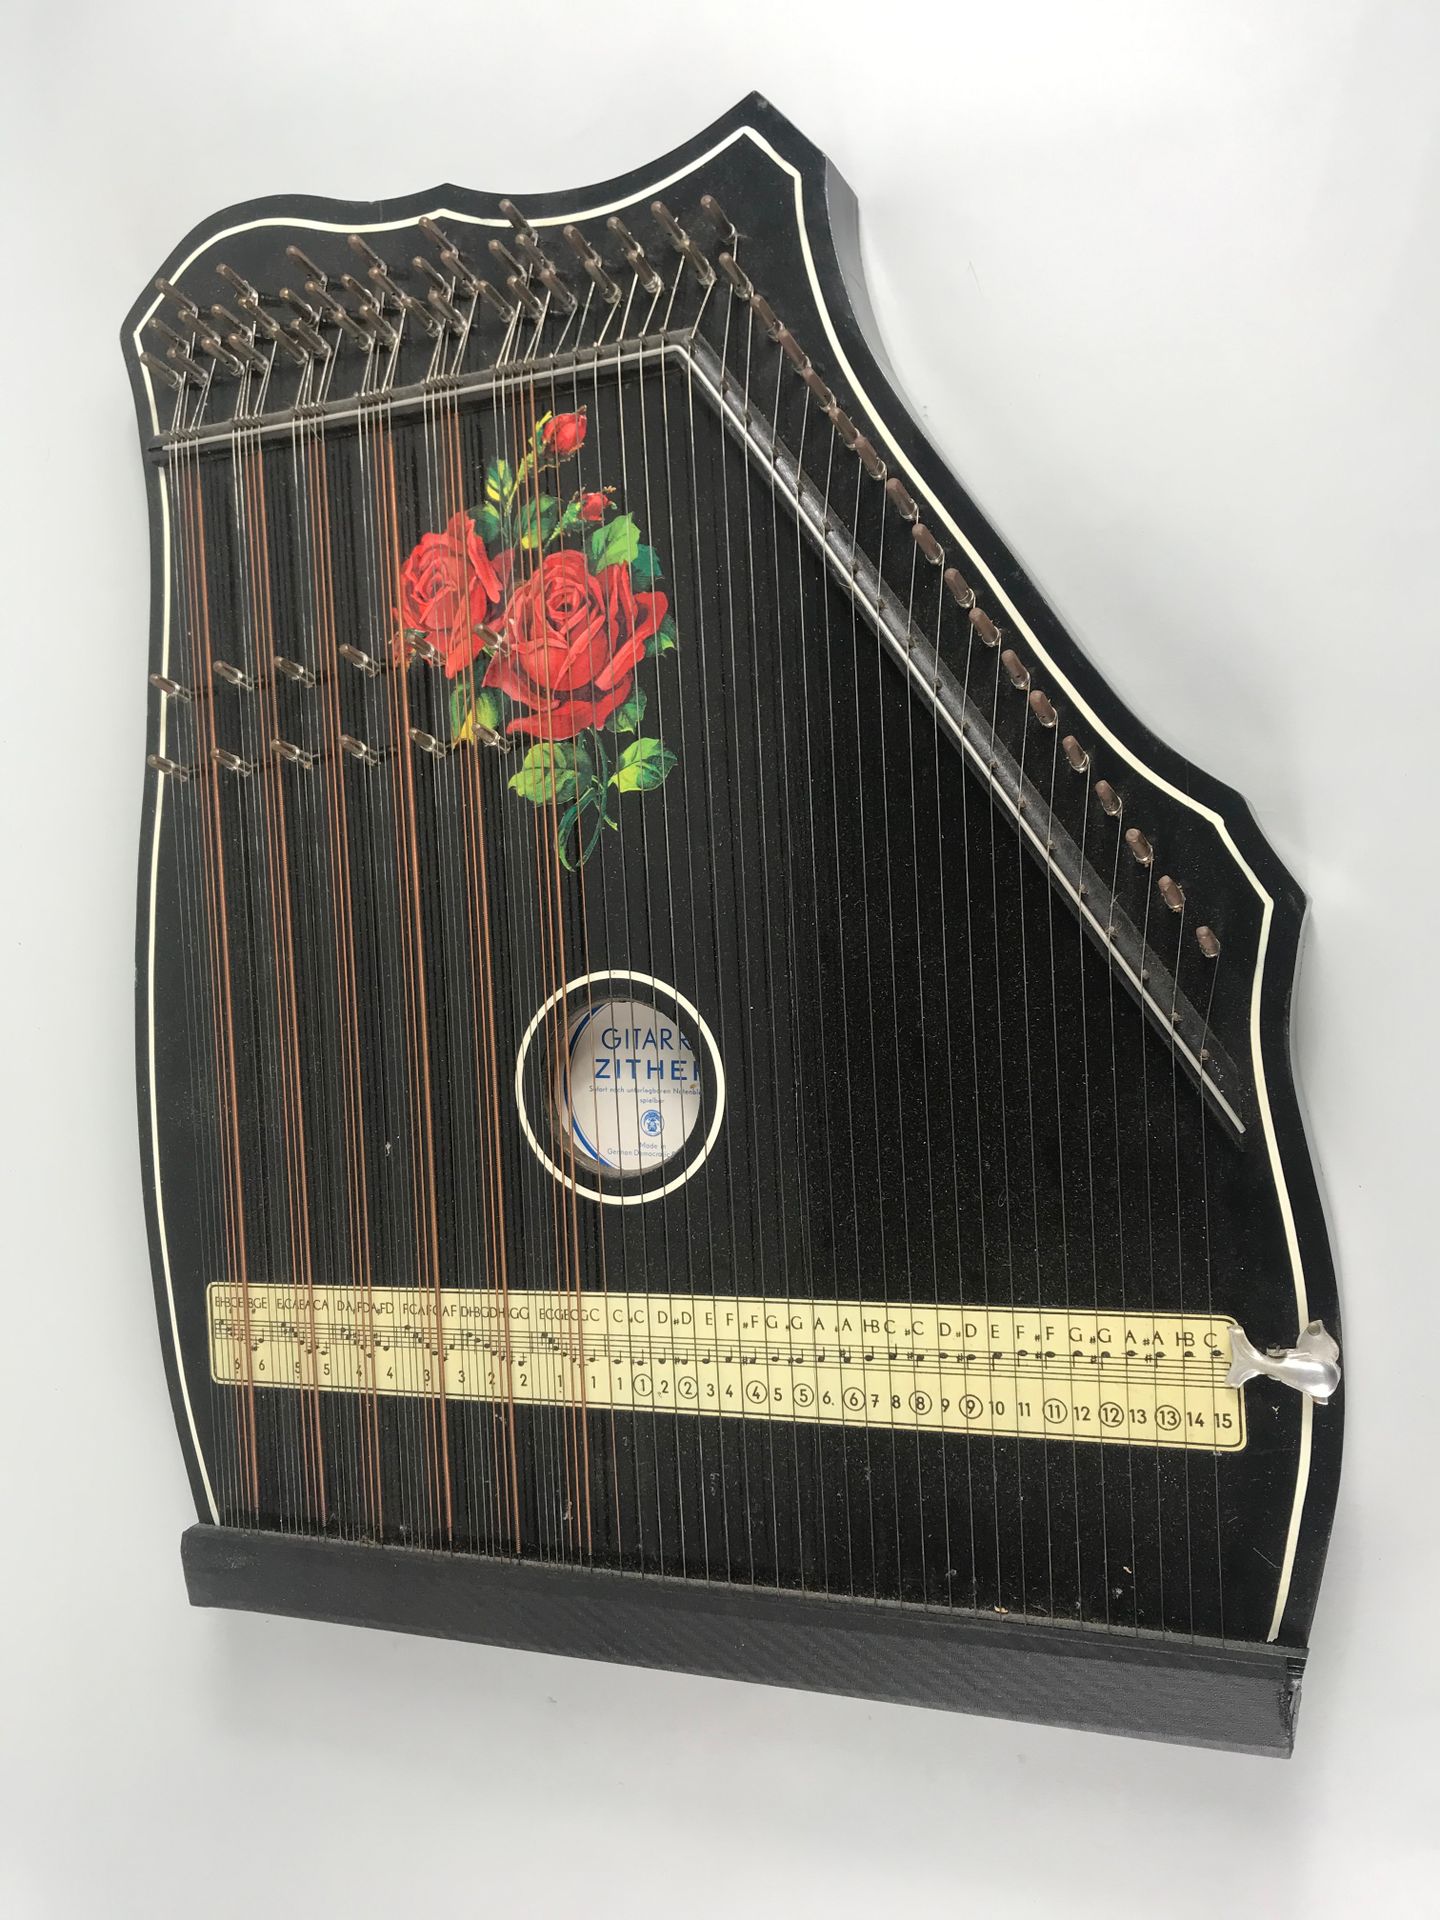 Null German zither, circa 1890. In its box, with accessories.